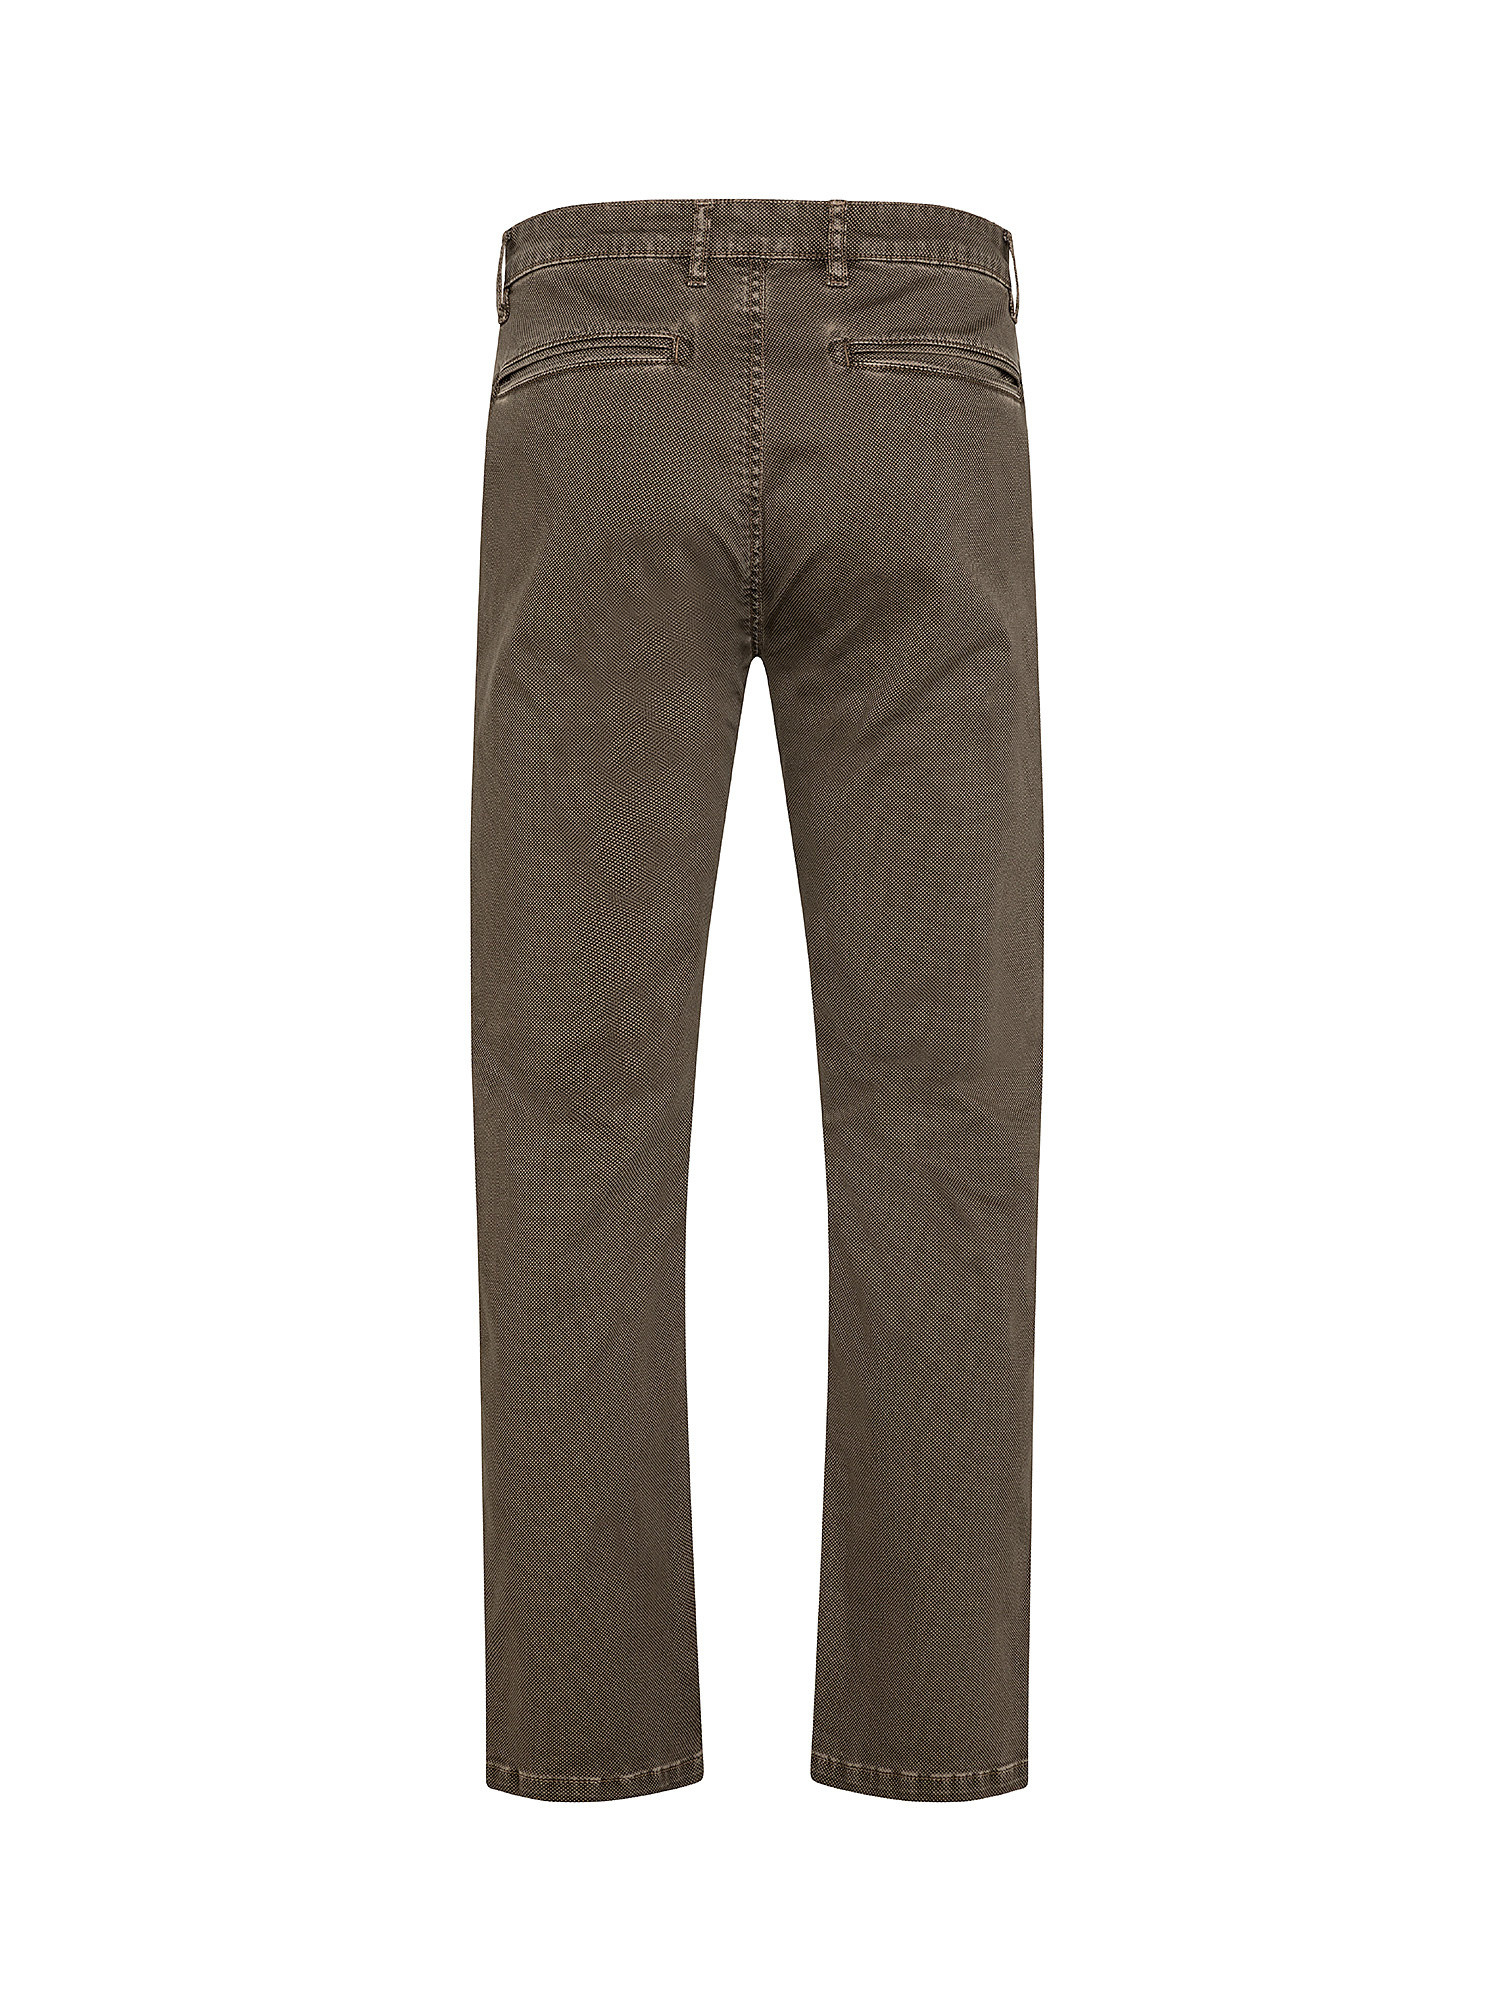 Pantalone chinos in cotone stretch, Marrone, large image number 1